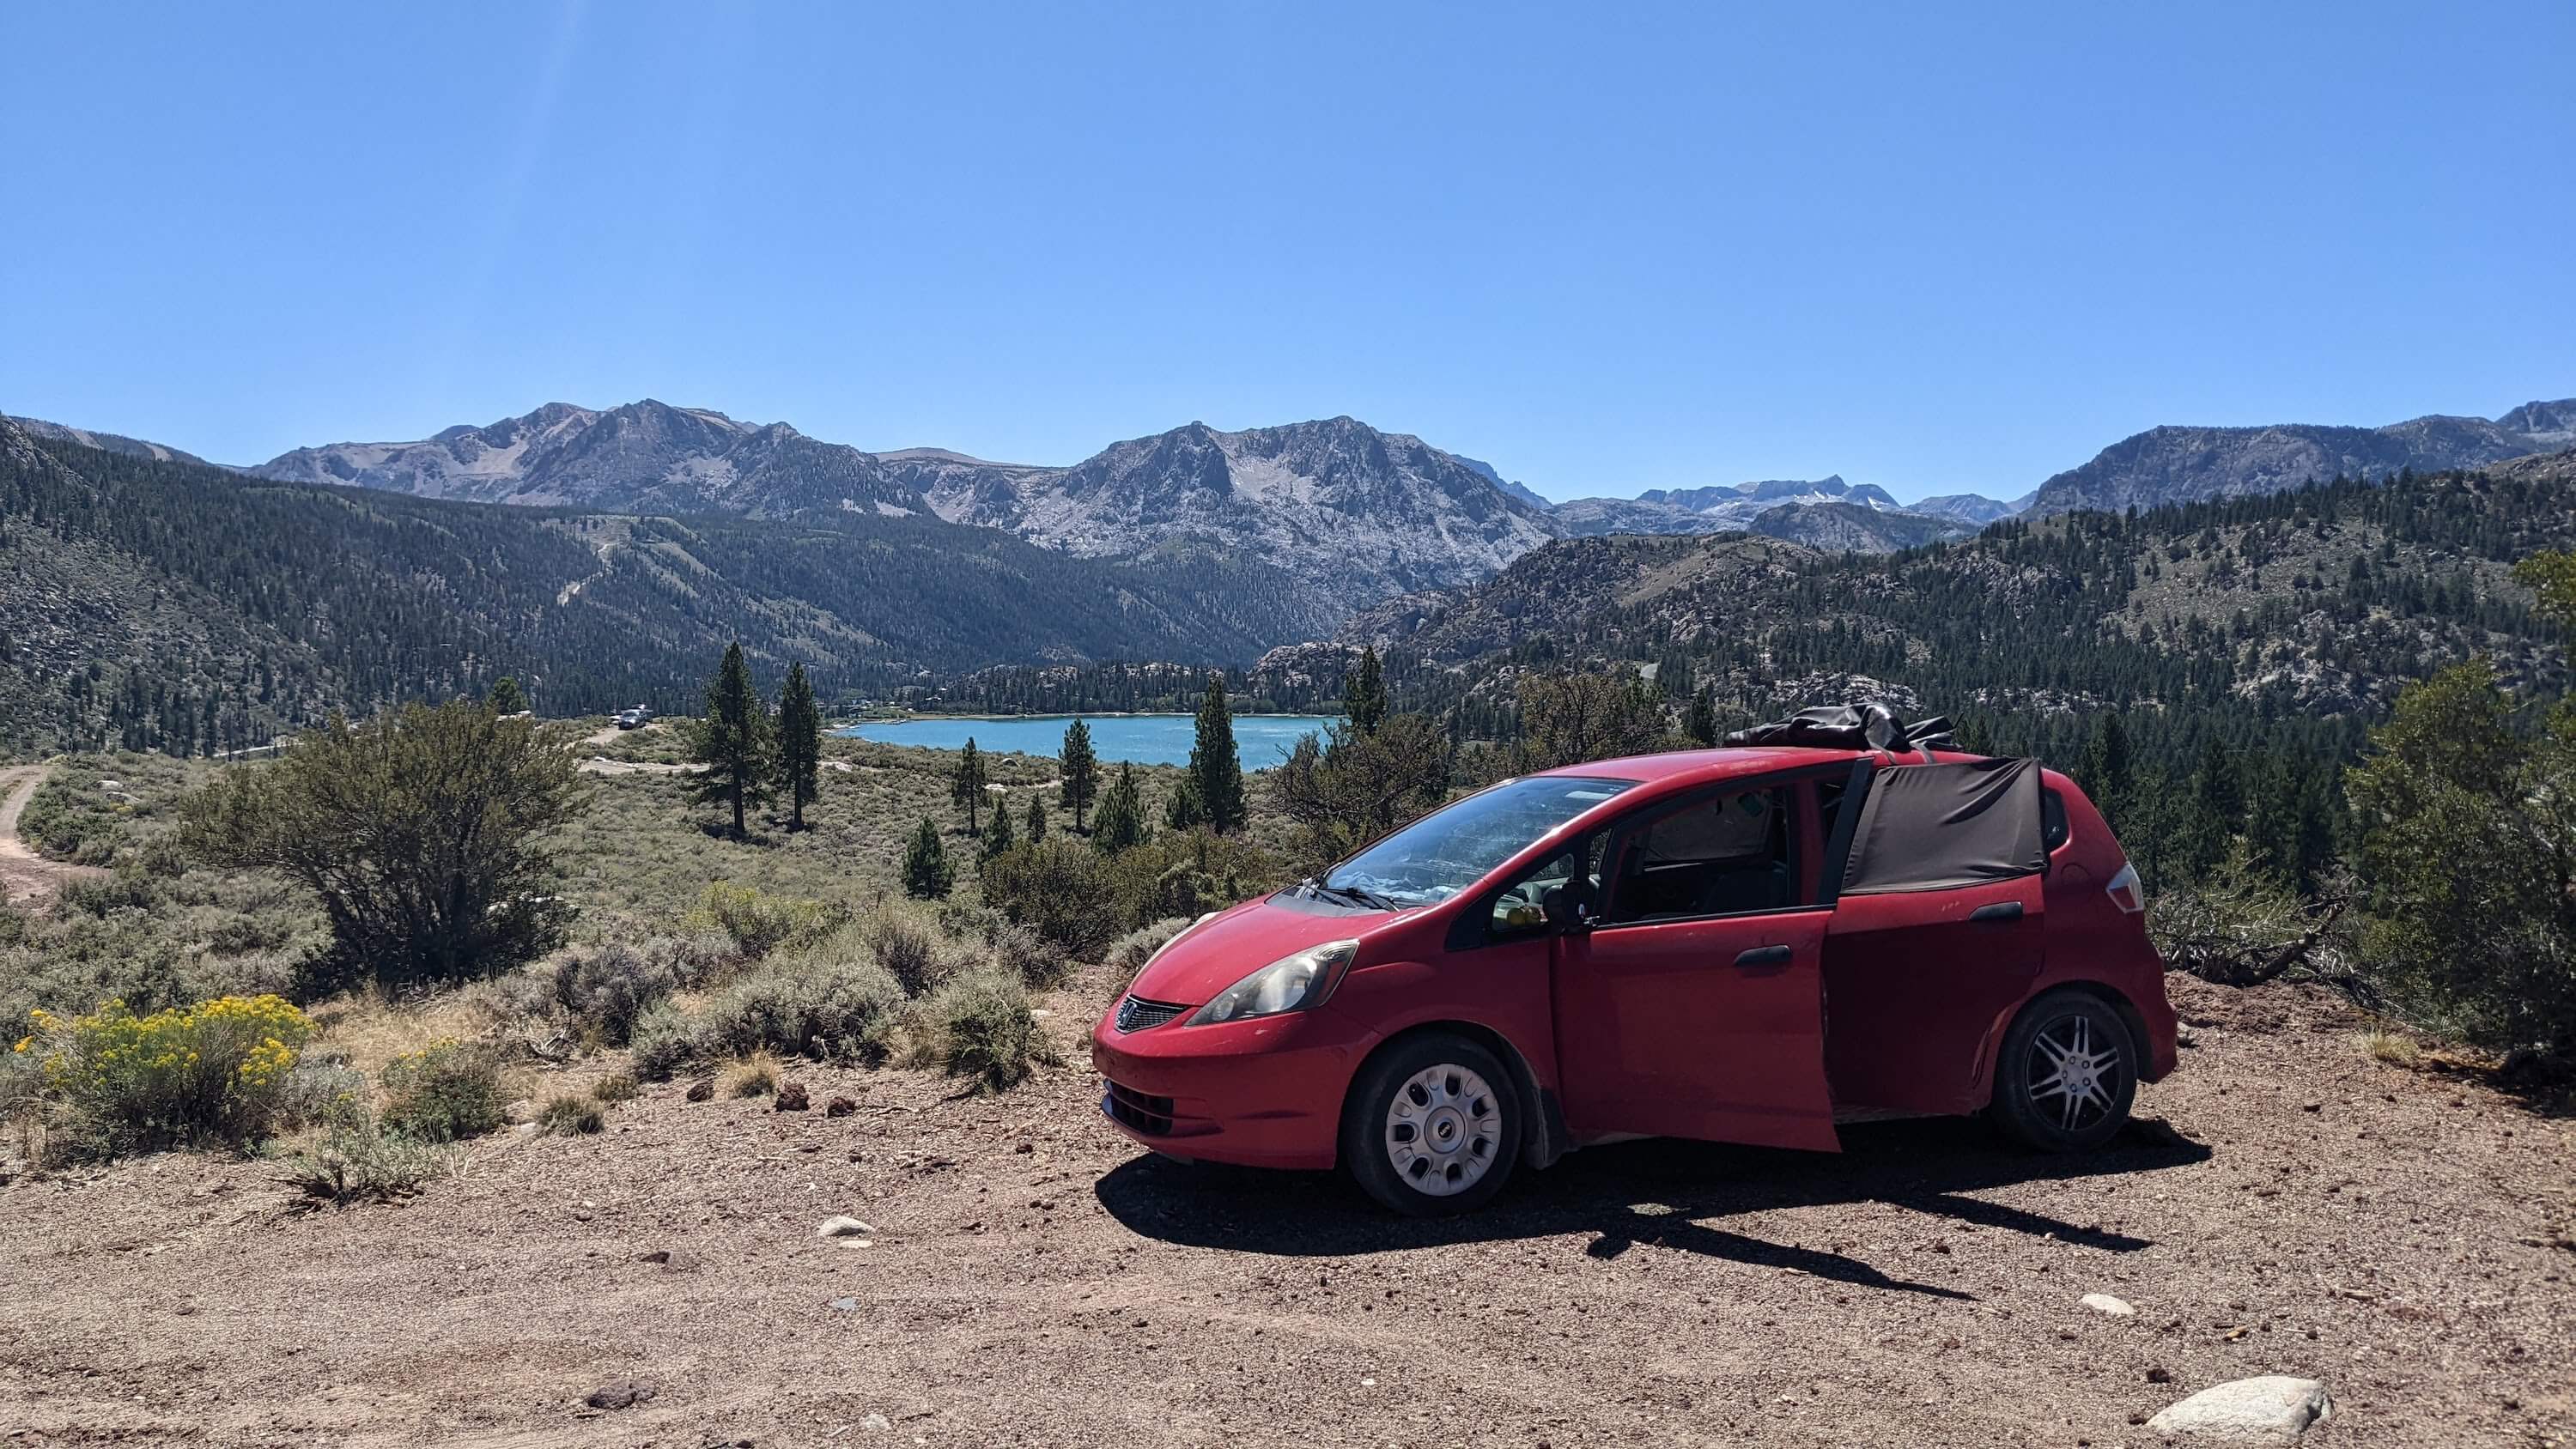 Red Honda Fit 2013 at the top of a mountain overlooking mountains and a lake on a bright sunny day